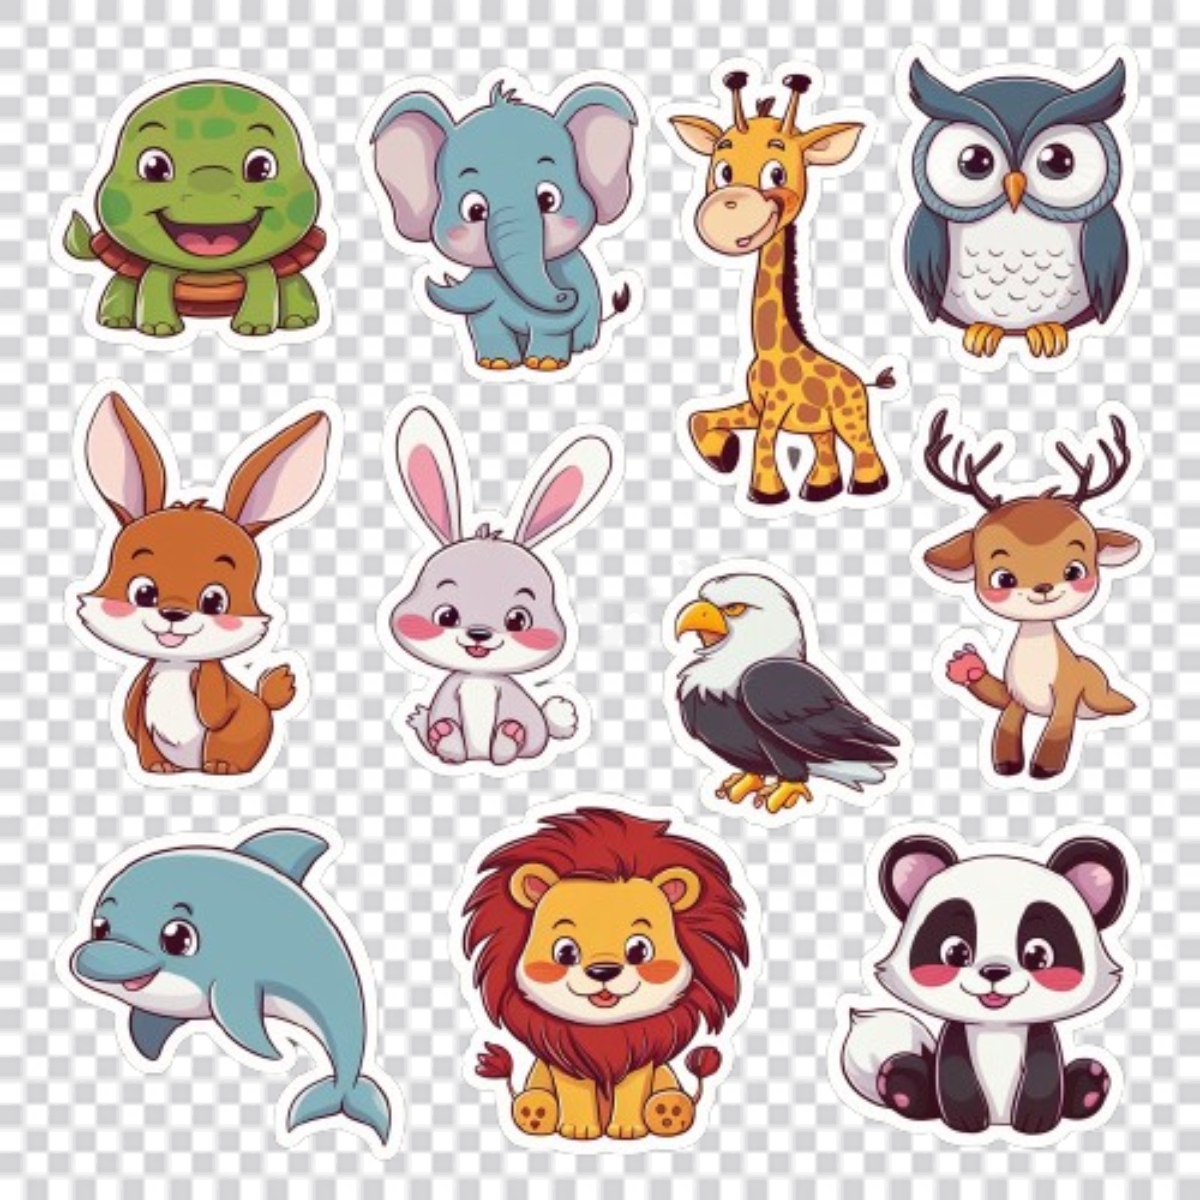 Animals png images download for free